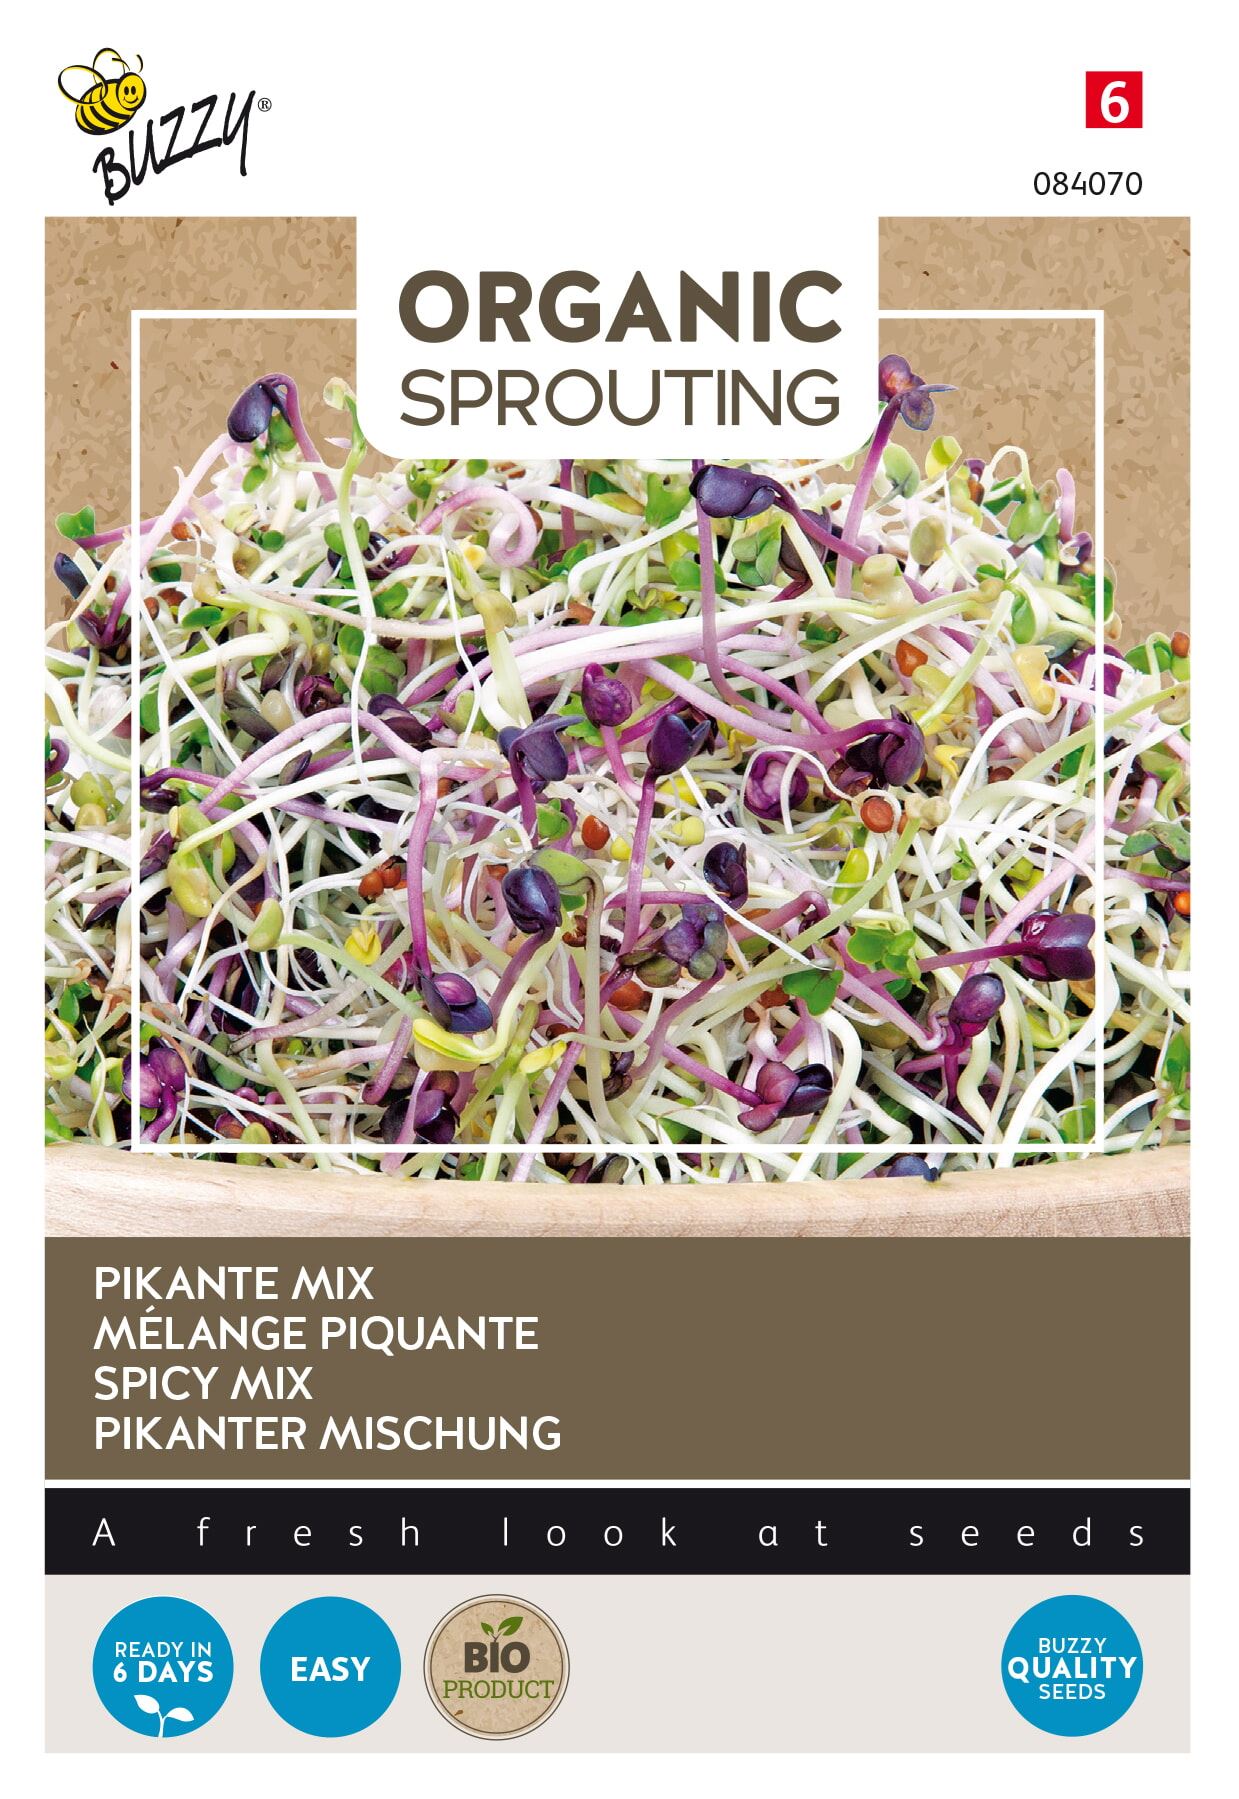 Buzzy-Organic-Sprouting-Salademengsel-pikant-BIO-